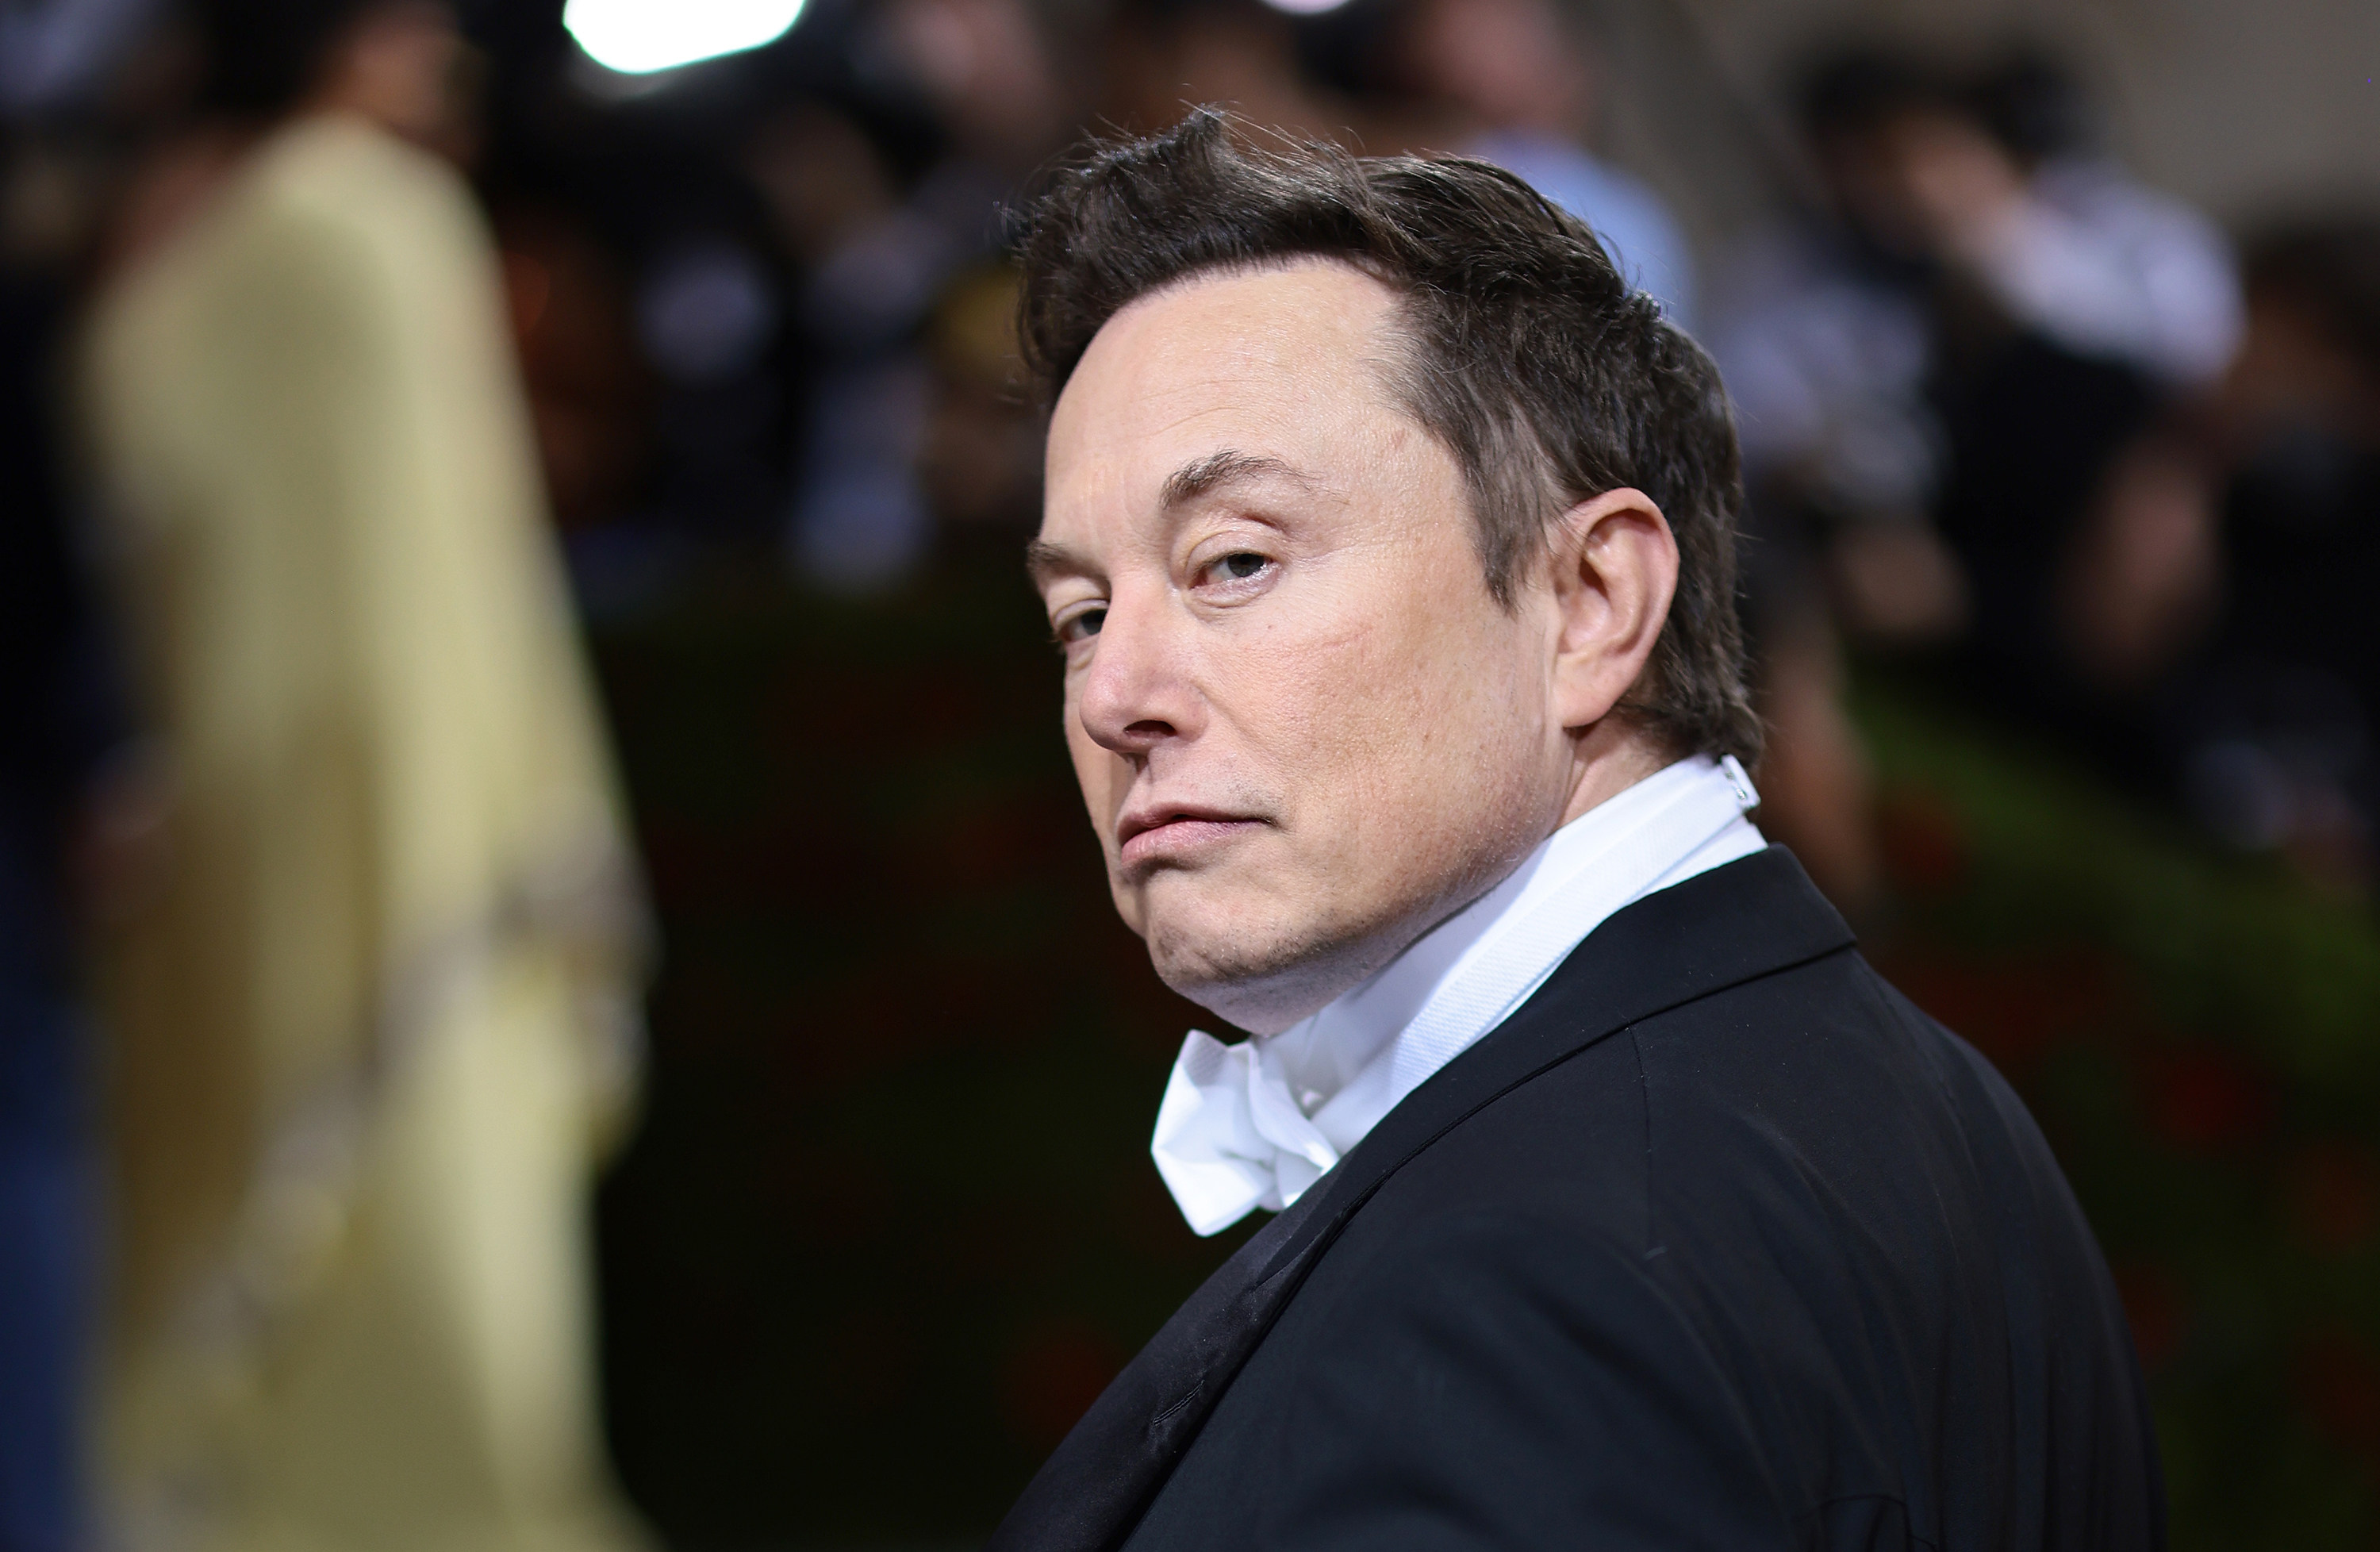 Twitter’s new owner Elon Musk. Photo: Getty Images for The Met Museum / Vogue / TNS